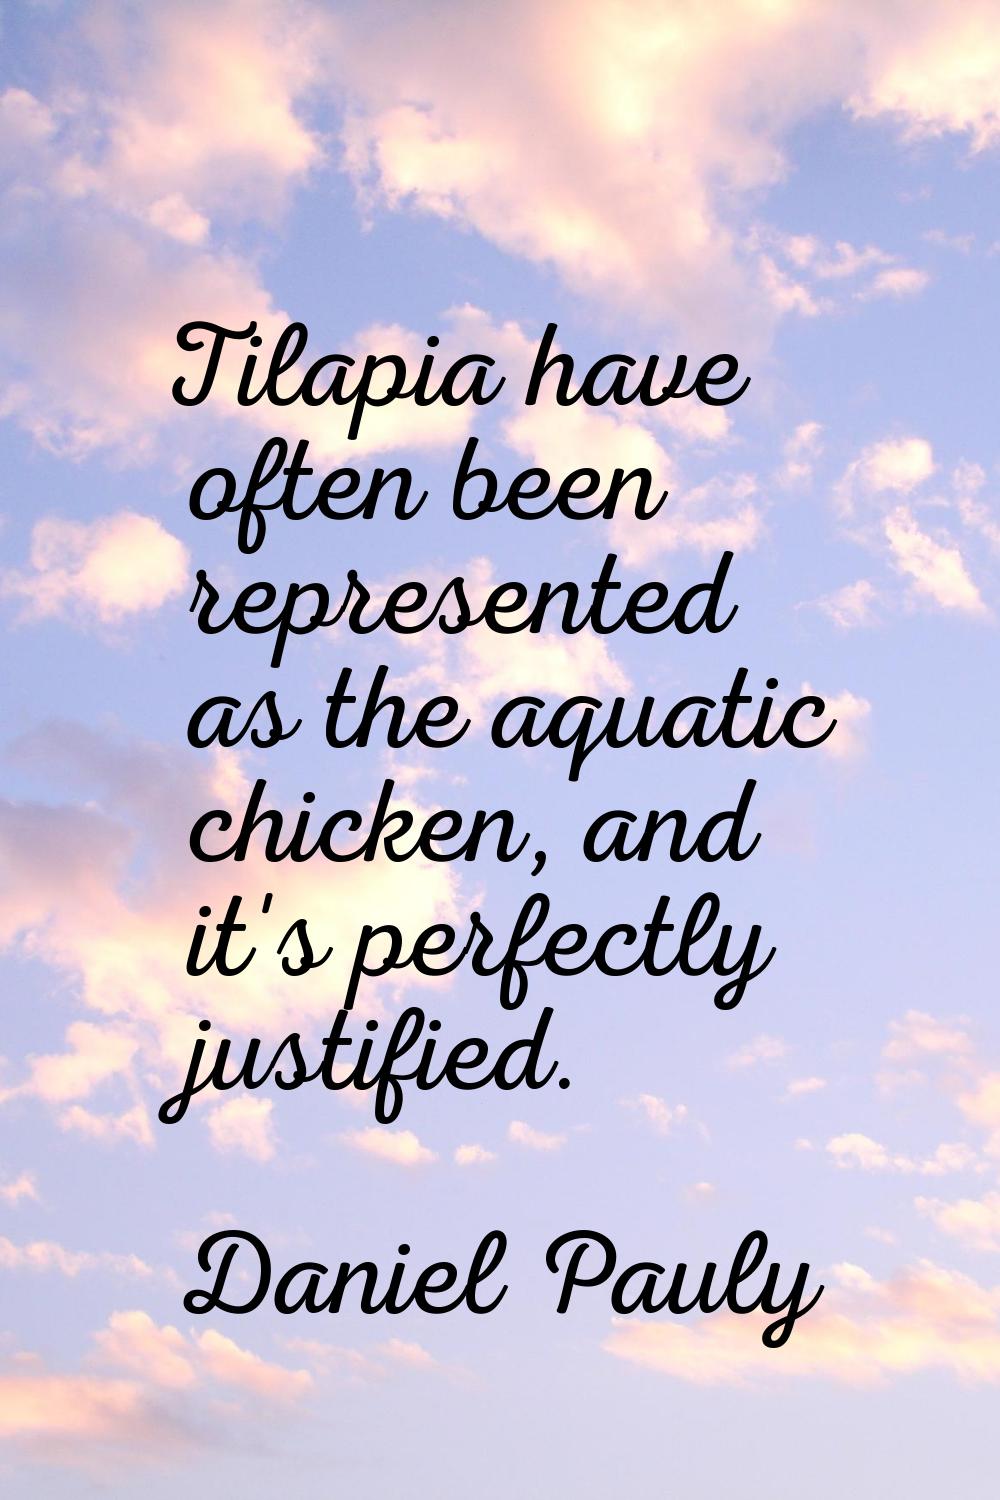 Tilapia have often been represented as the aquatic chicken, and it's perfectly justified.